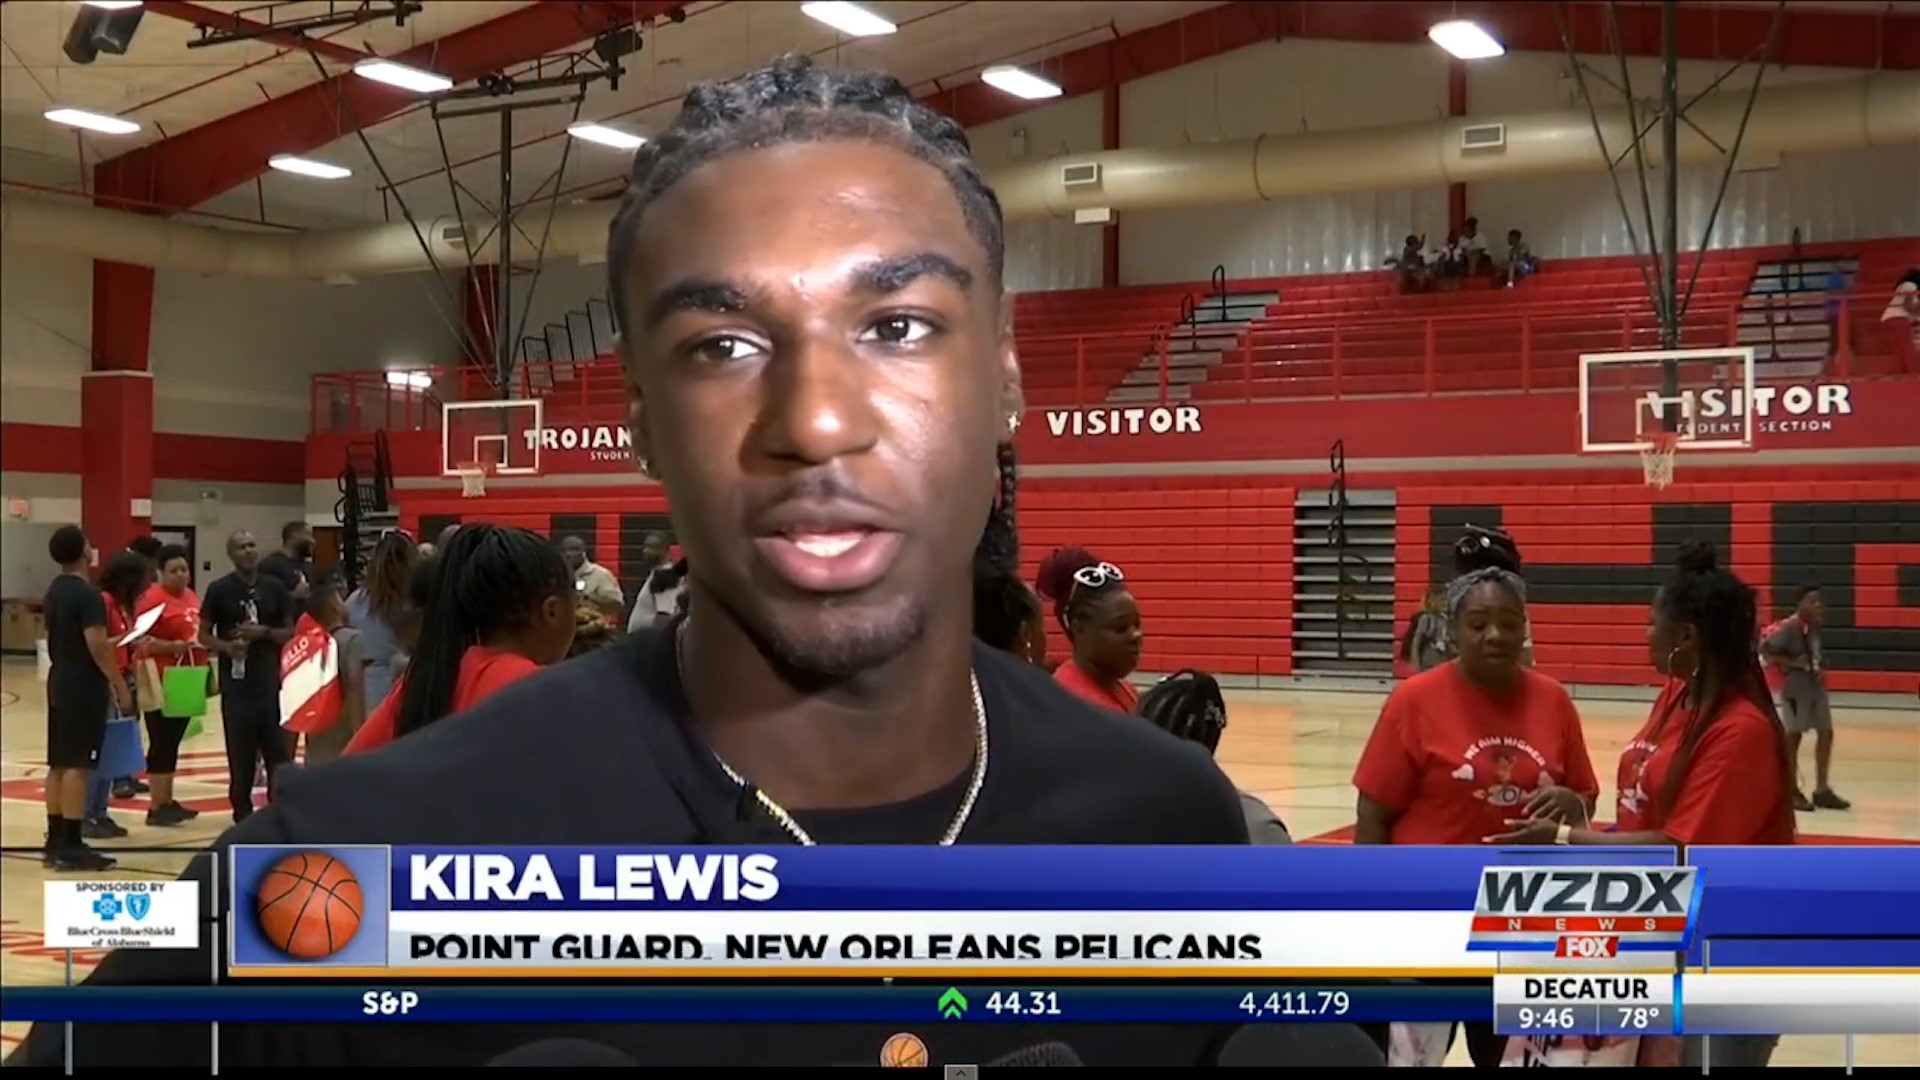 Kira Lewis returned to his alma mater to host a youth basketball camp.